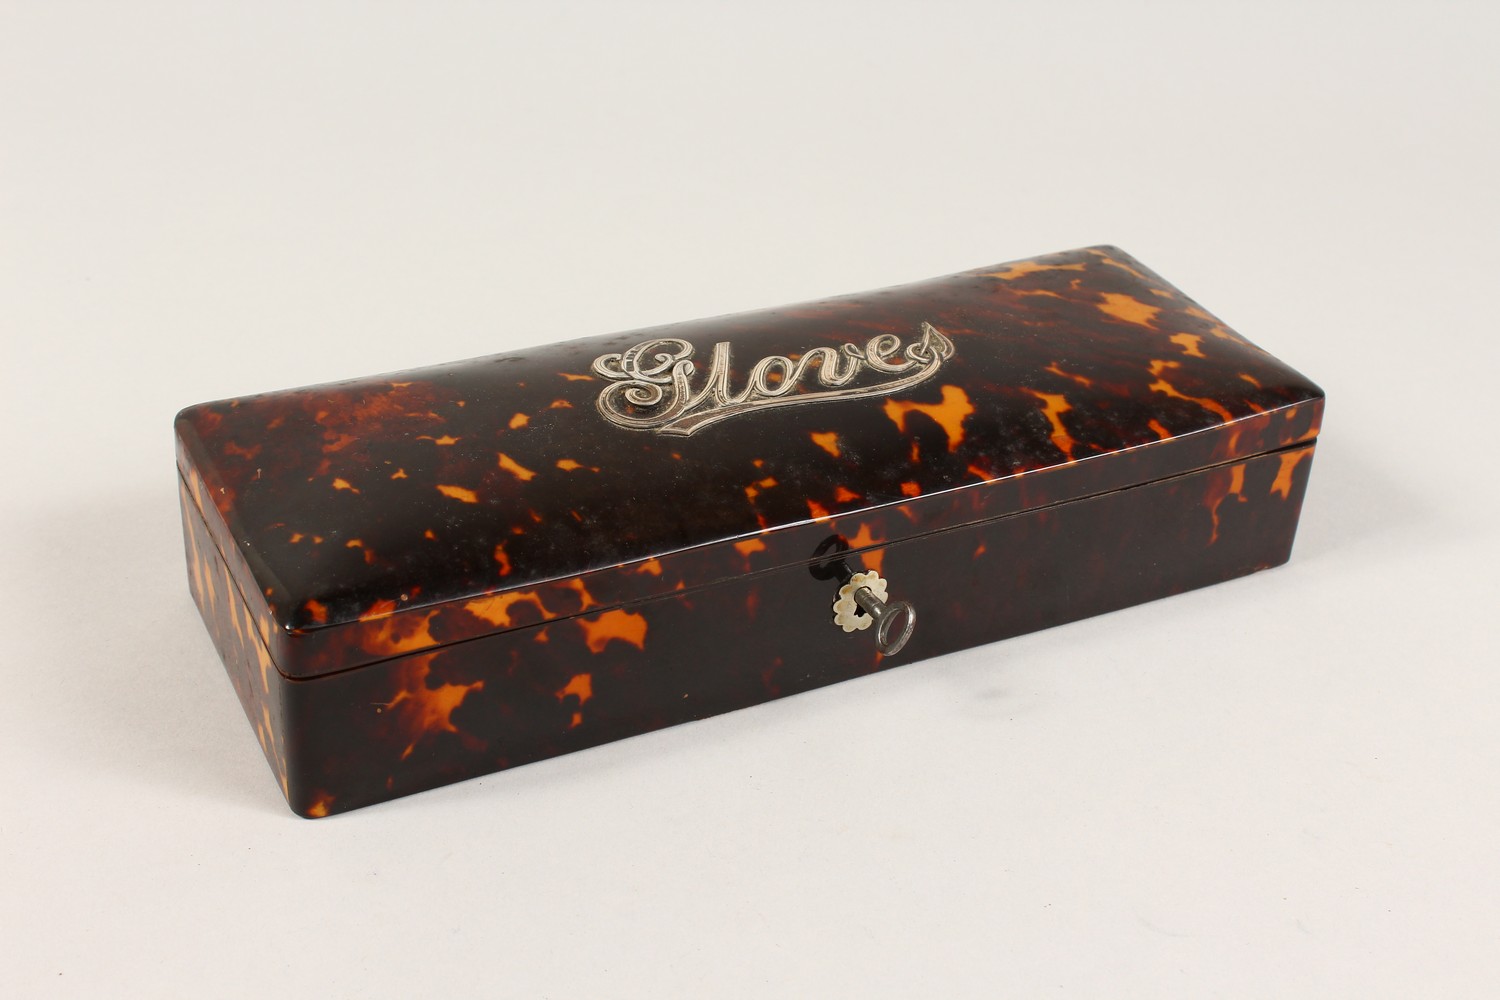 A VICTORIAN RECTANGULAR TORTOISESHELL GLOVE BOX, the lid with "Gloves" in silver. 26cms long. - Image 5 of 9